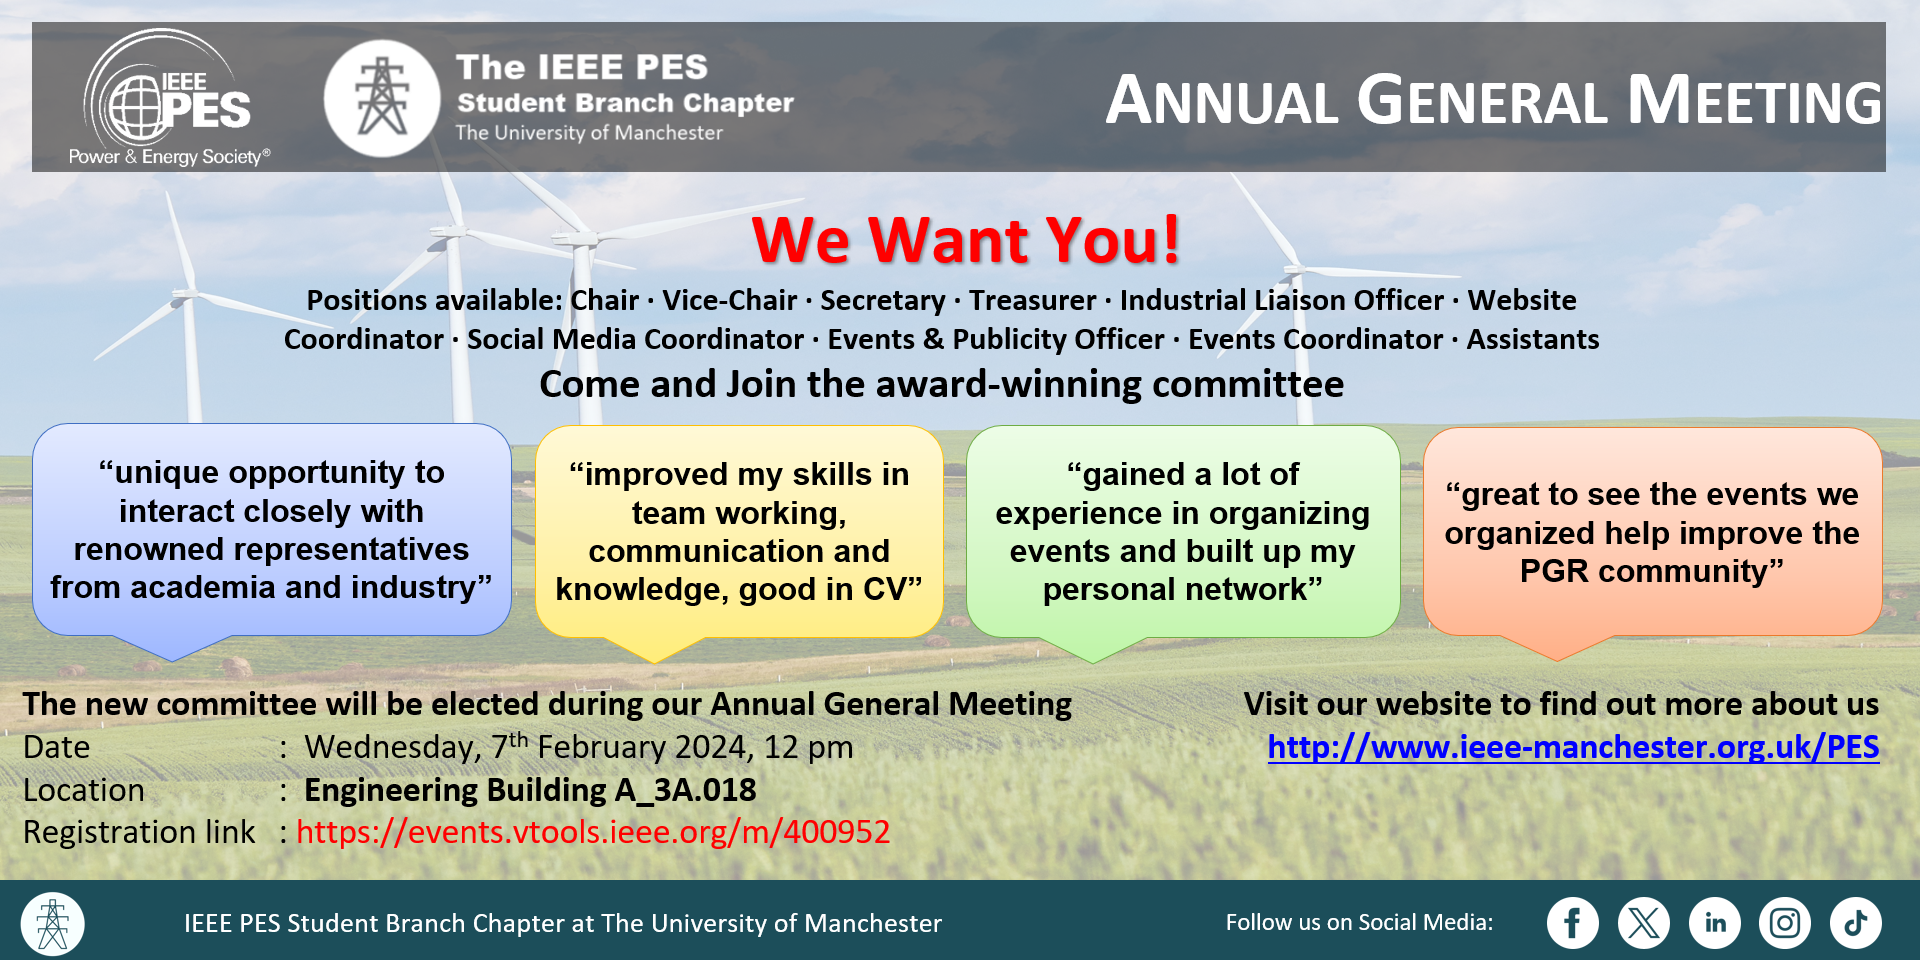 IEEE PES SBC UoM Annual General Meeting 2024 The IEEE PES Student